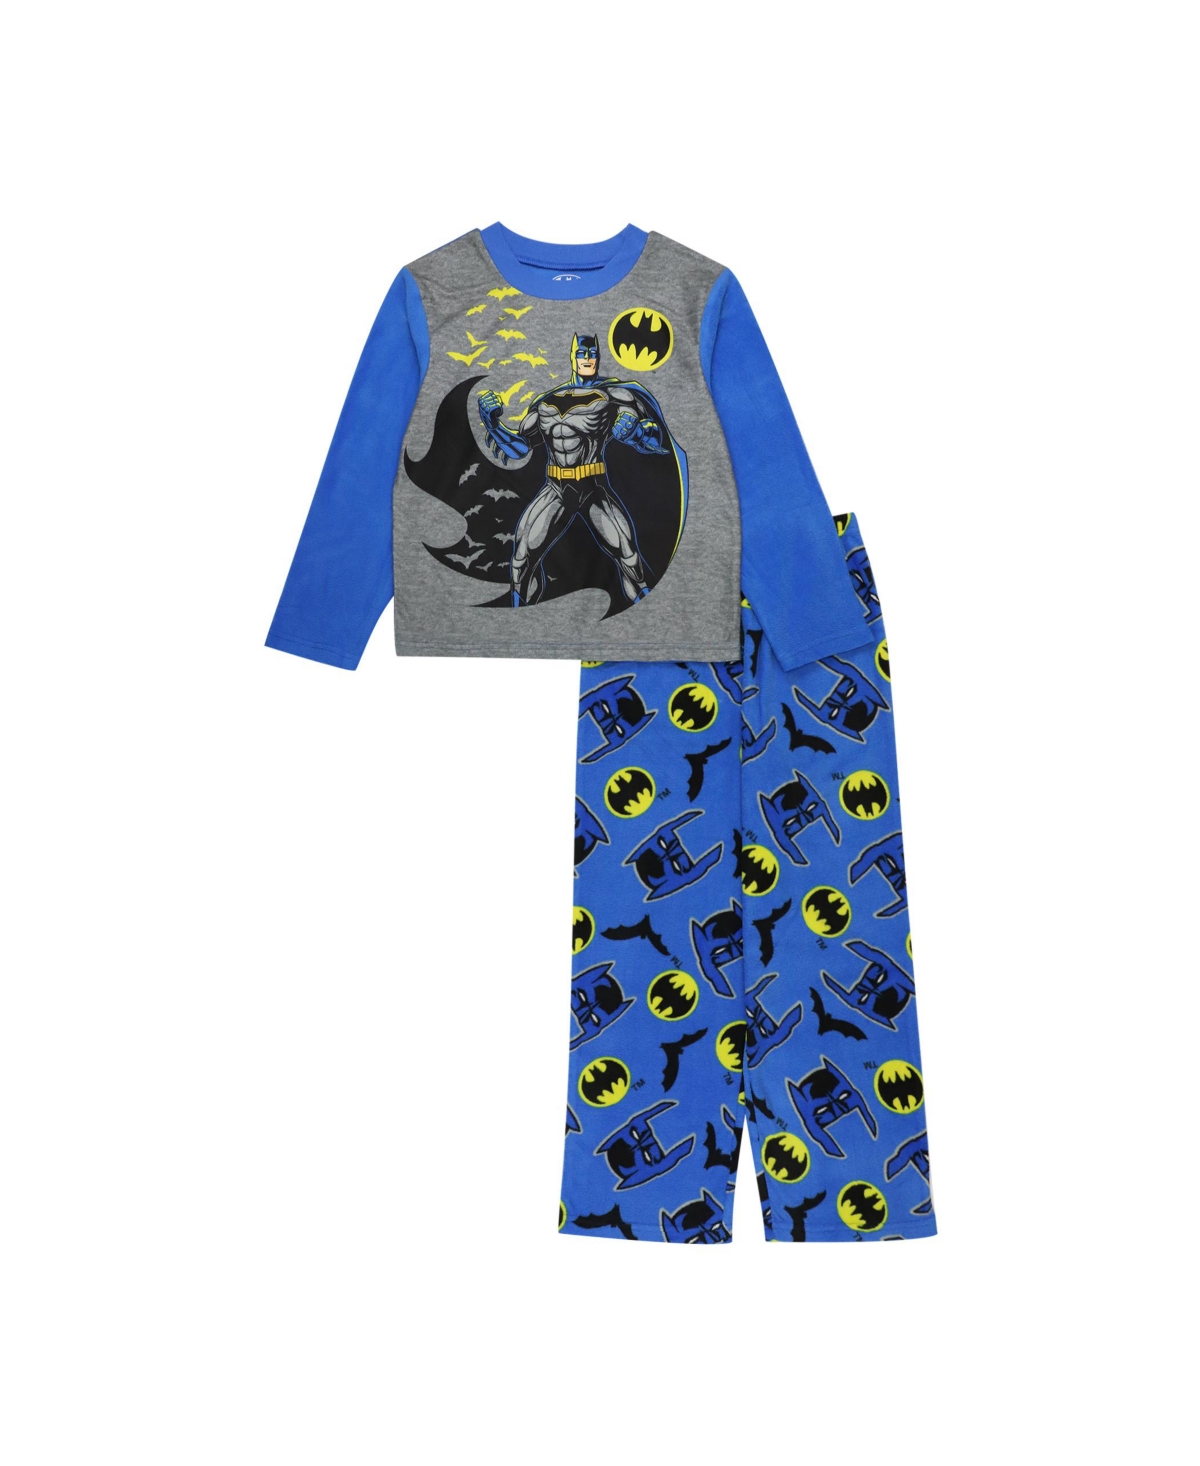 Avengers Kids' Little Boys Top And Pajama, 2 Piece Set In Assorted